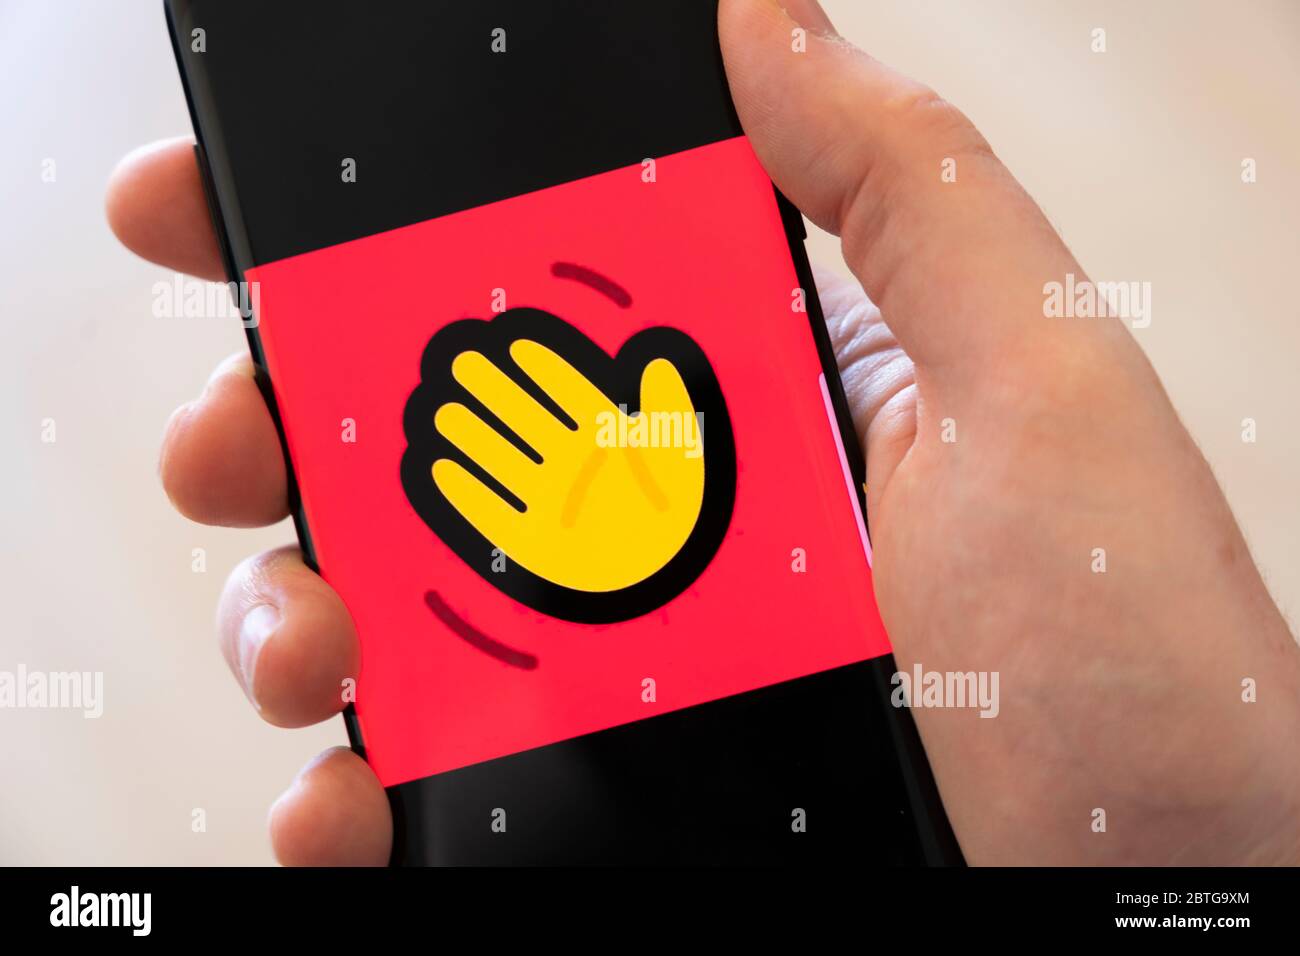 A man's hand holding a smartphone displaying a large logo for the video calling app Houseparty Stock Photo